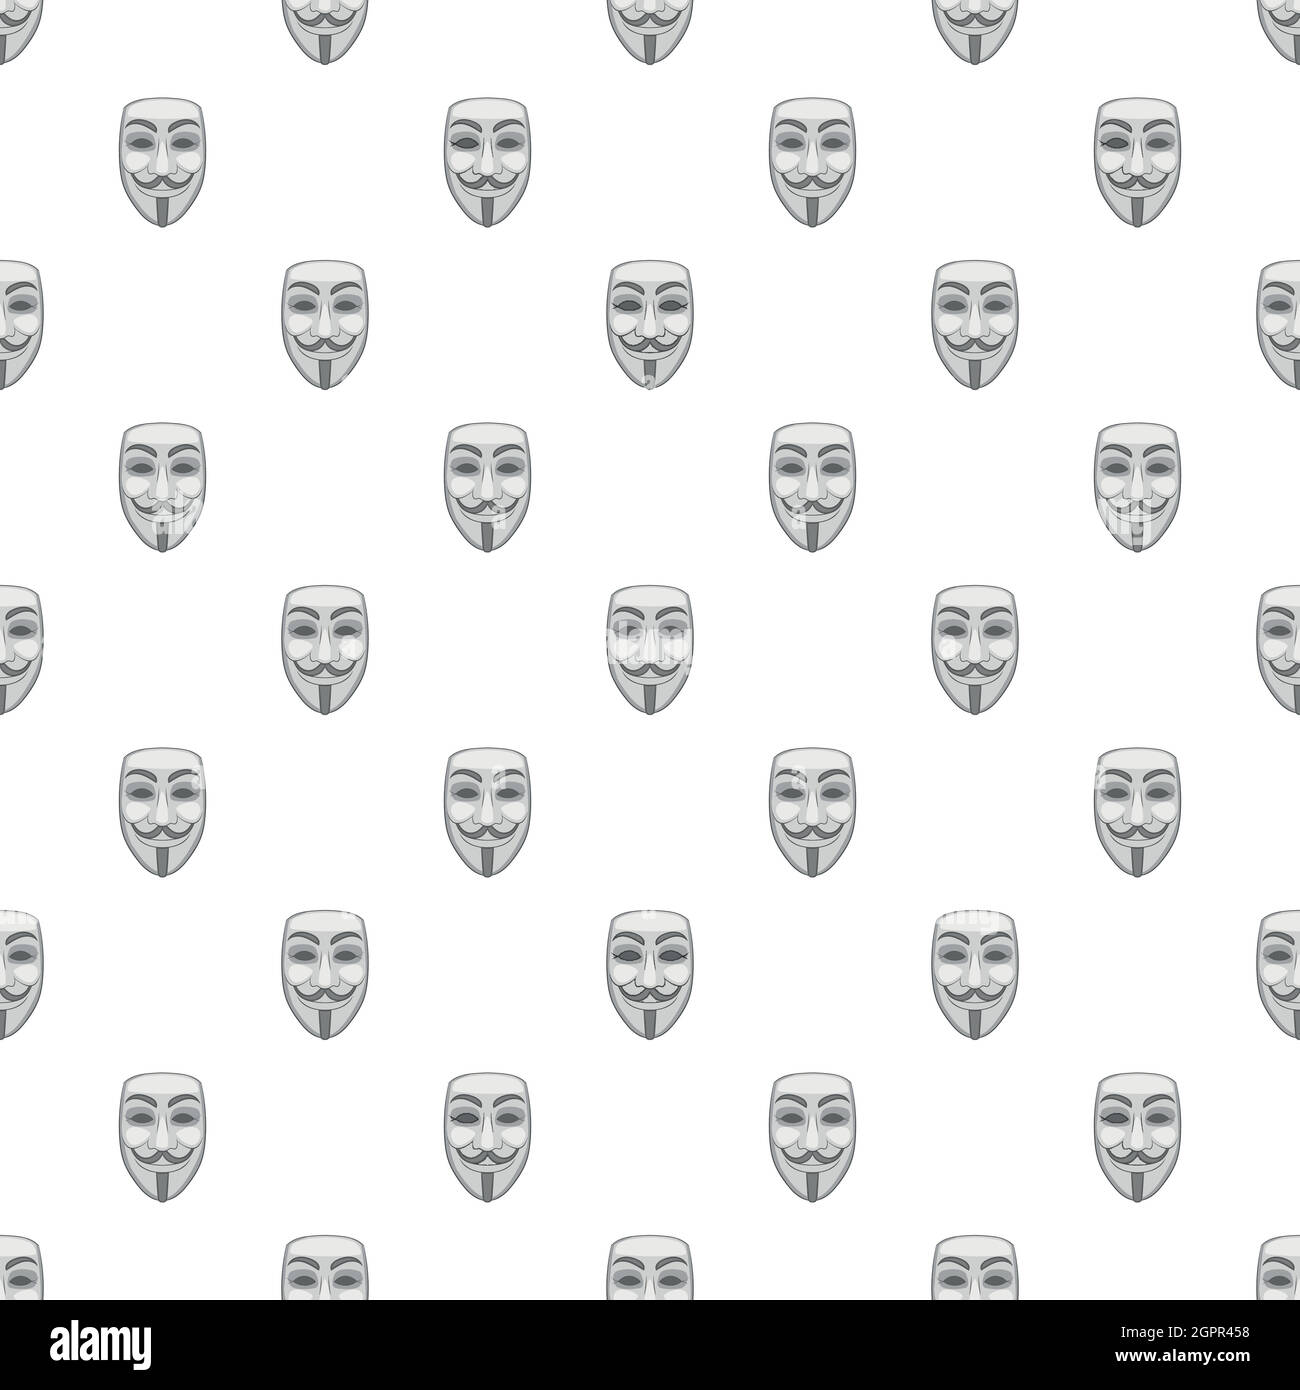 Mask of anonymous pattern, cartoon style Stock Vector